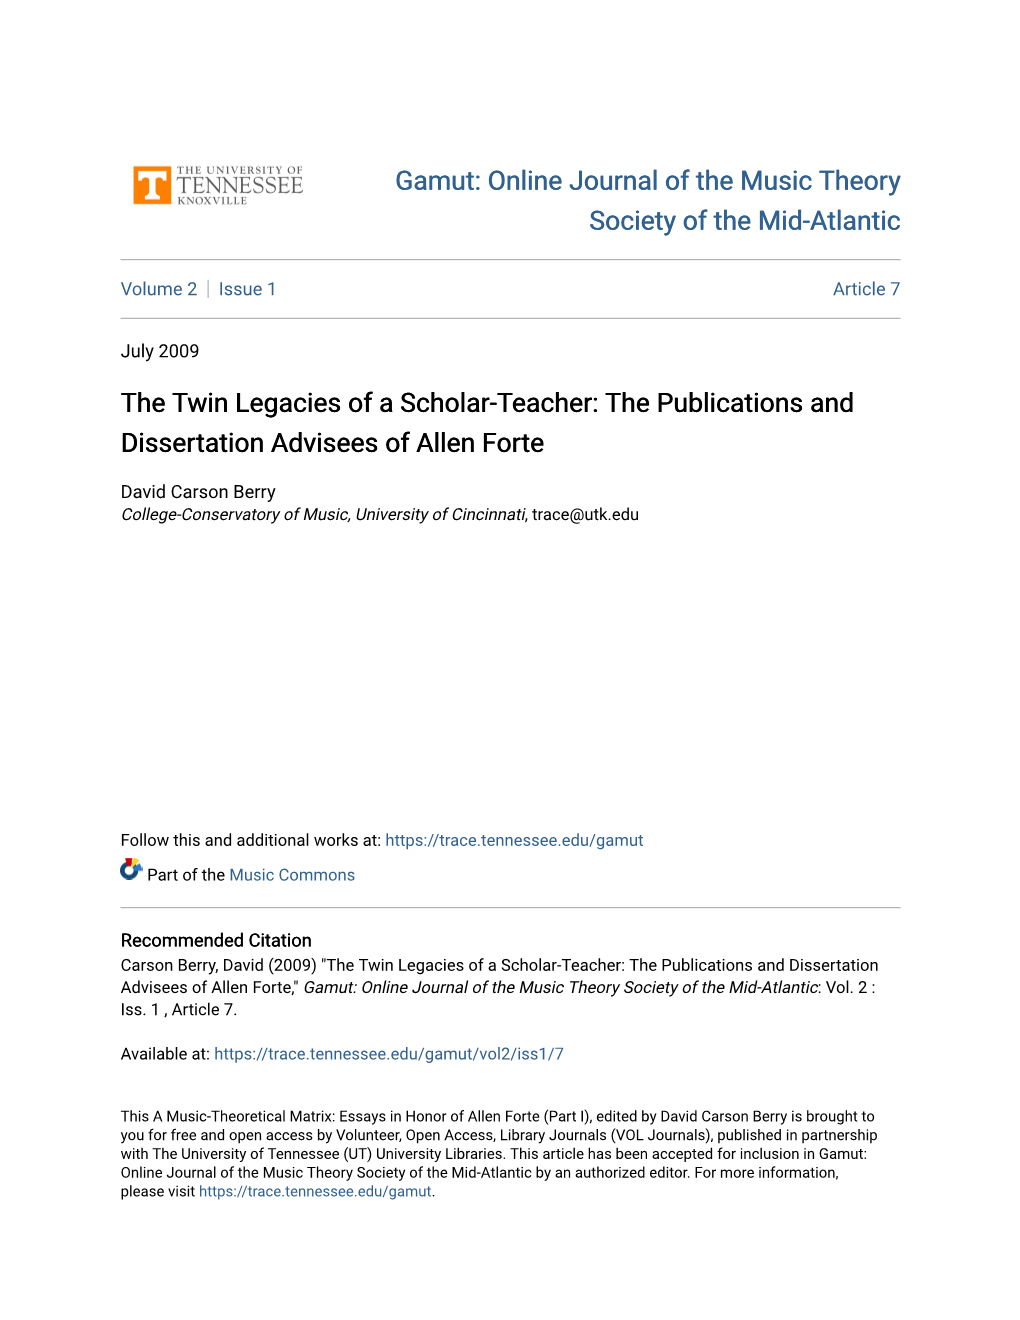 The Twin Legacies of a Scholar-Teacher: the Publications and Dissertation Advisees of Allen Forte